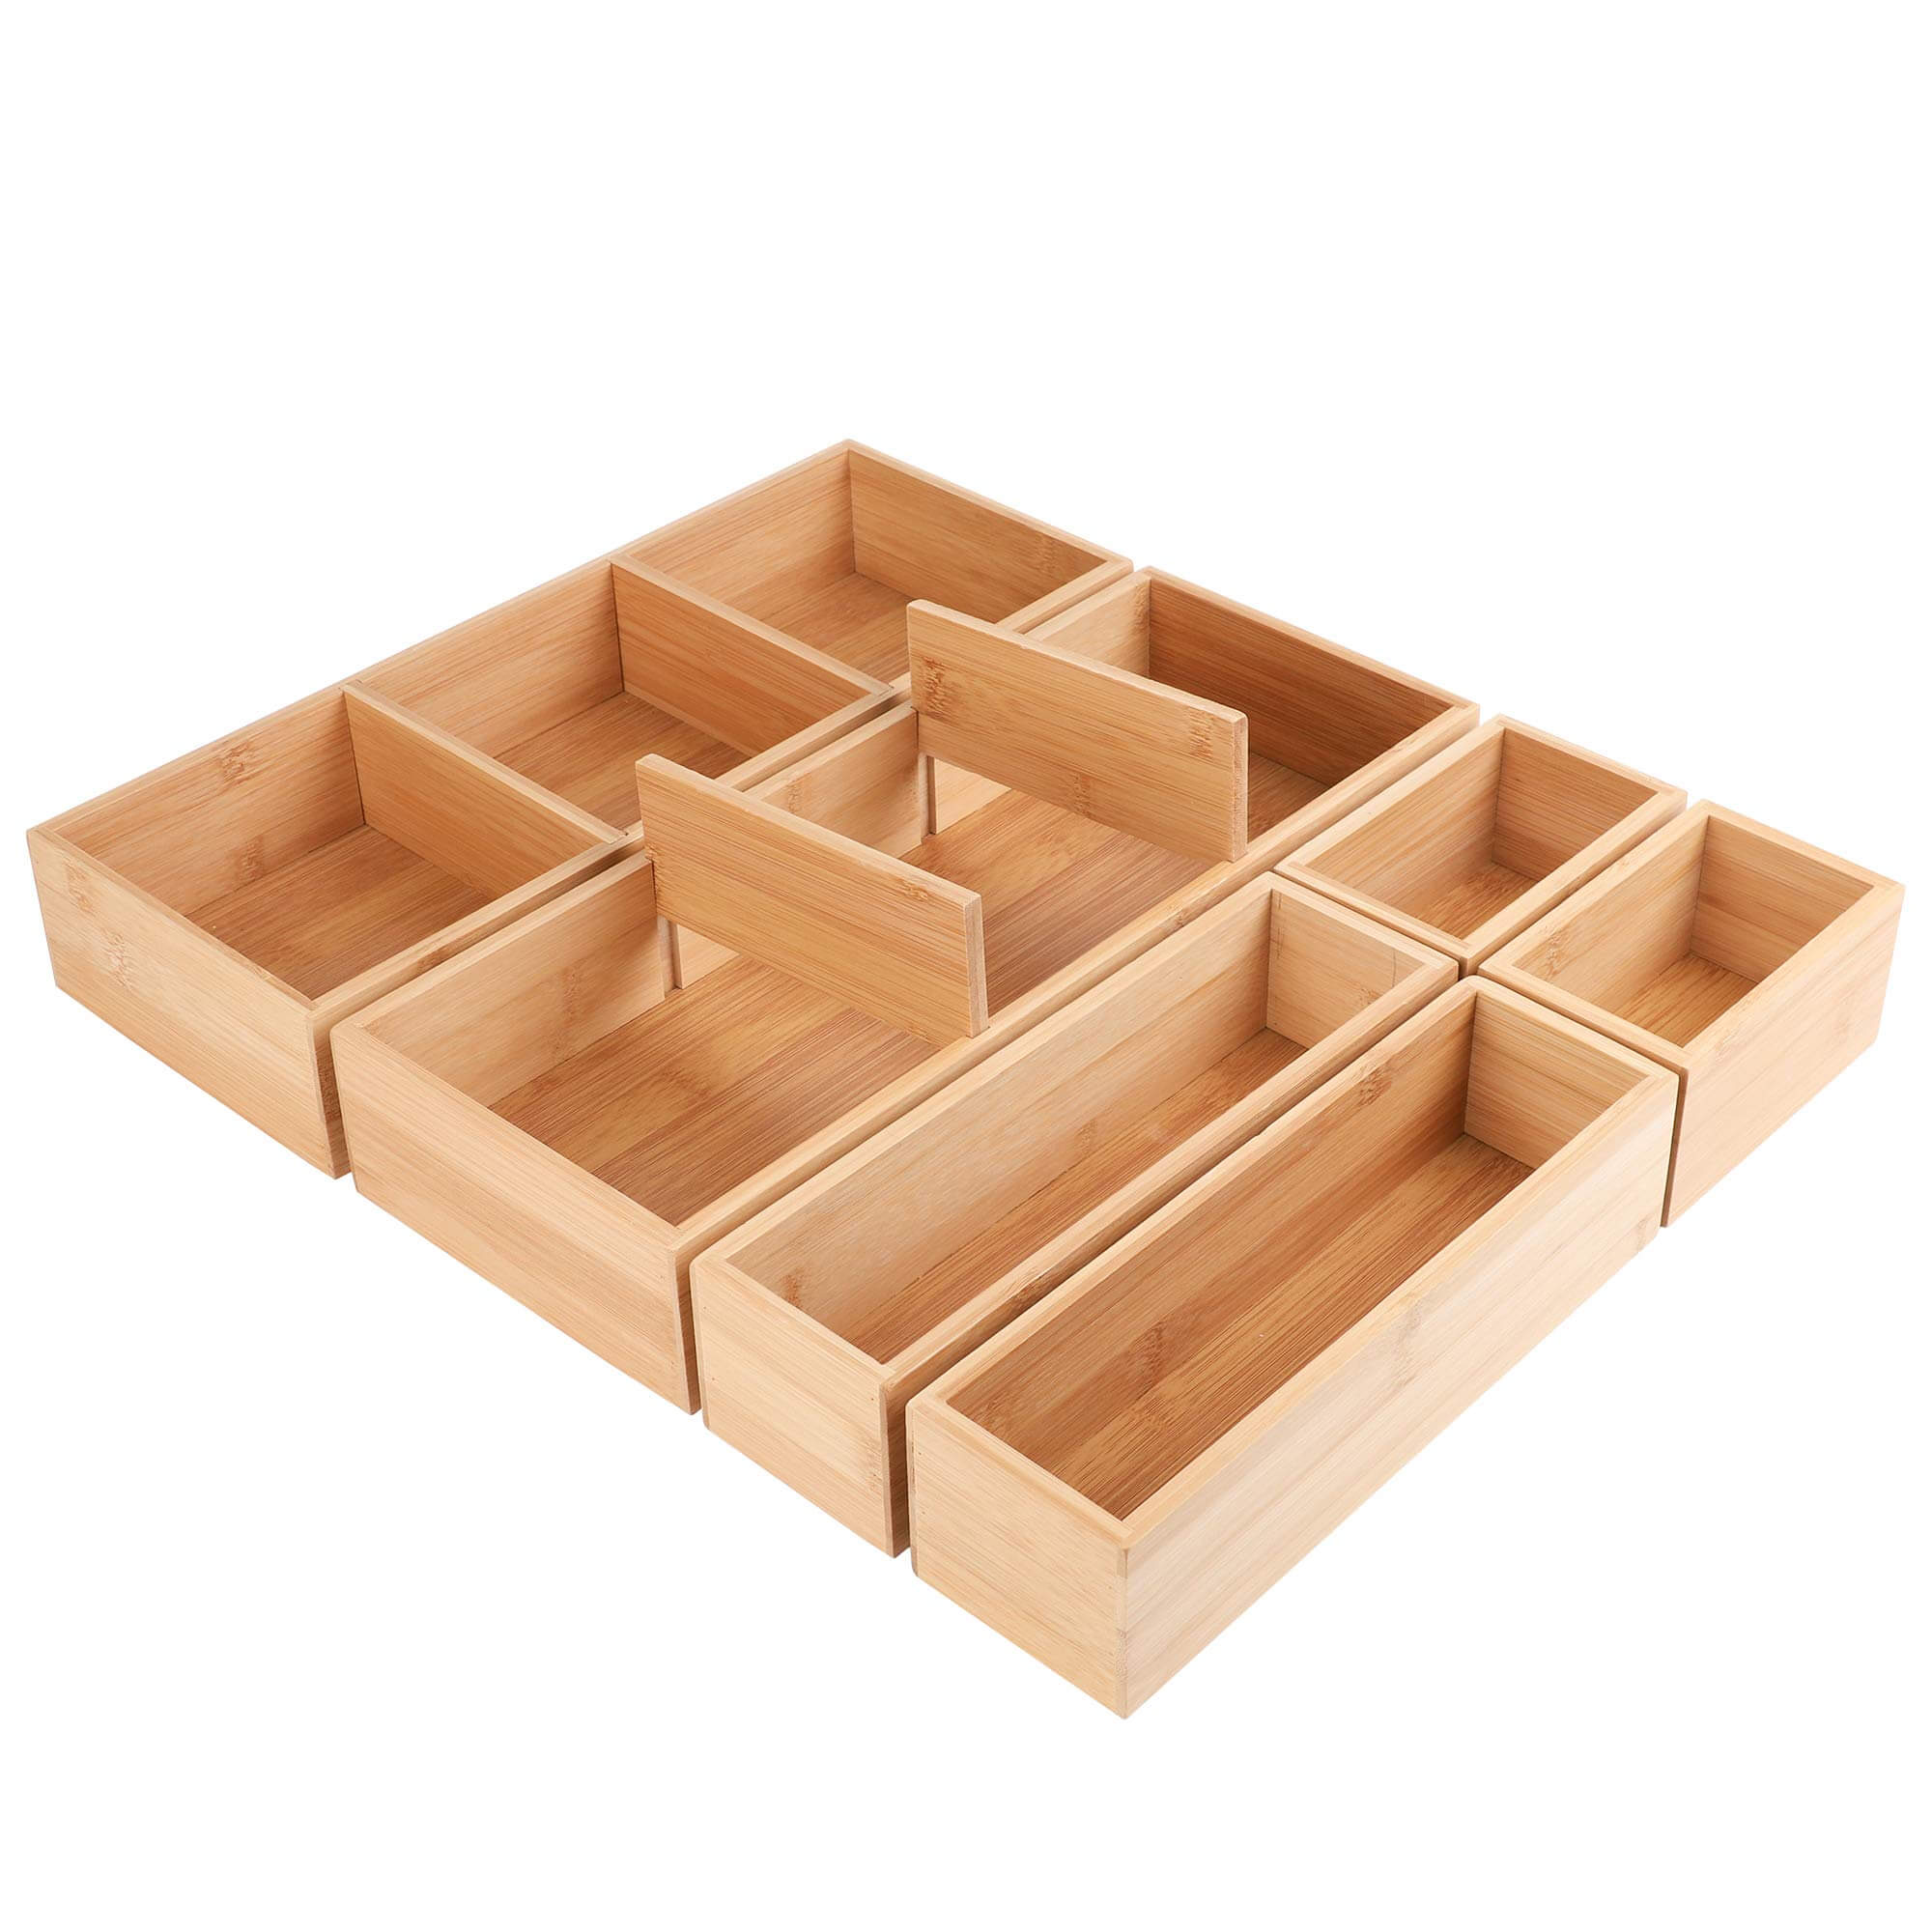 WOODEN ORGANIZER BOX WITH 3 DIVIDERS